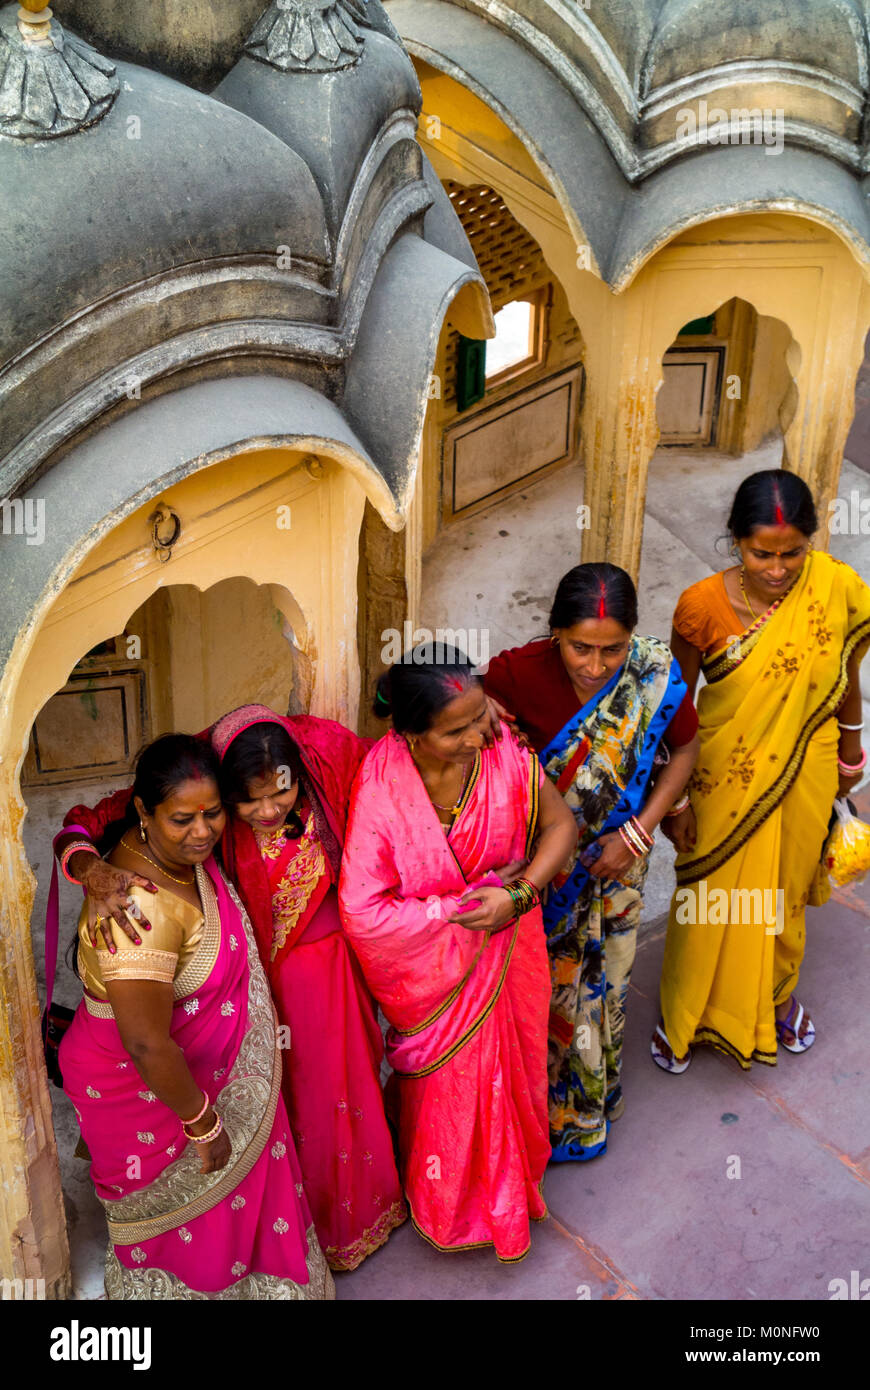 Jaipur, Rajasthan, India, 25th of January, 2017: Jaipur, Rajasthan, India, 25th of January, 2017: Indian women at palace of the winds Stock Photo